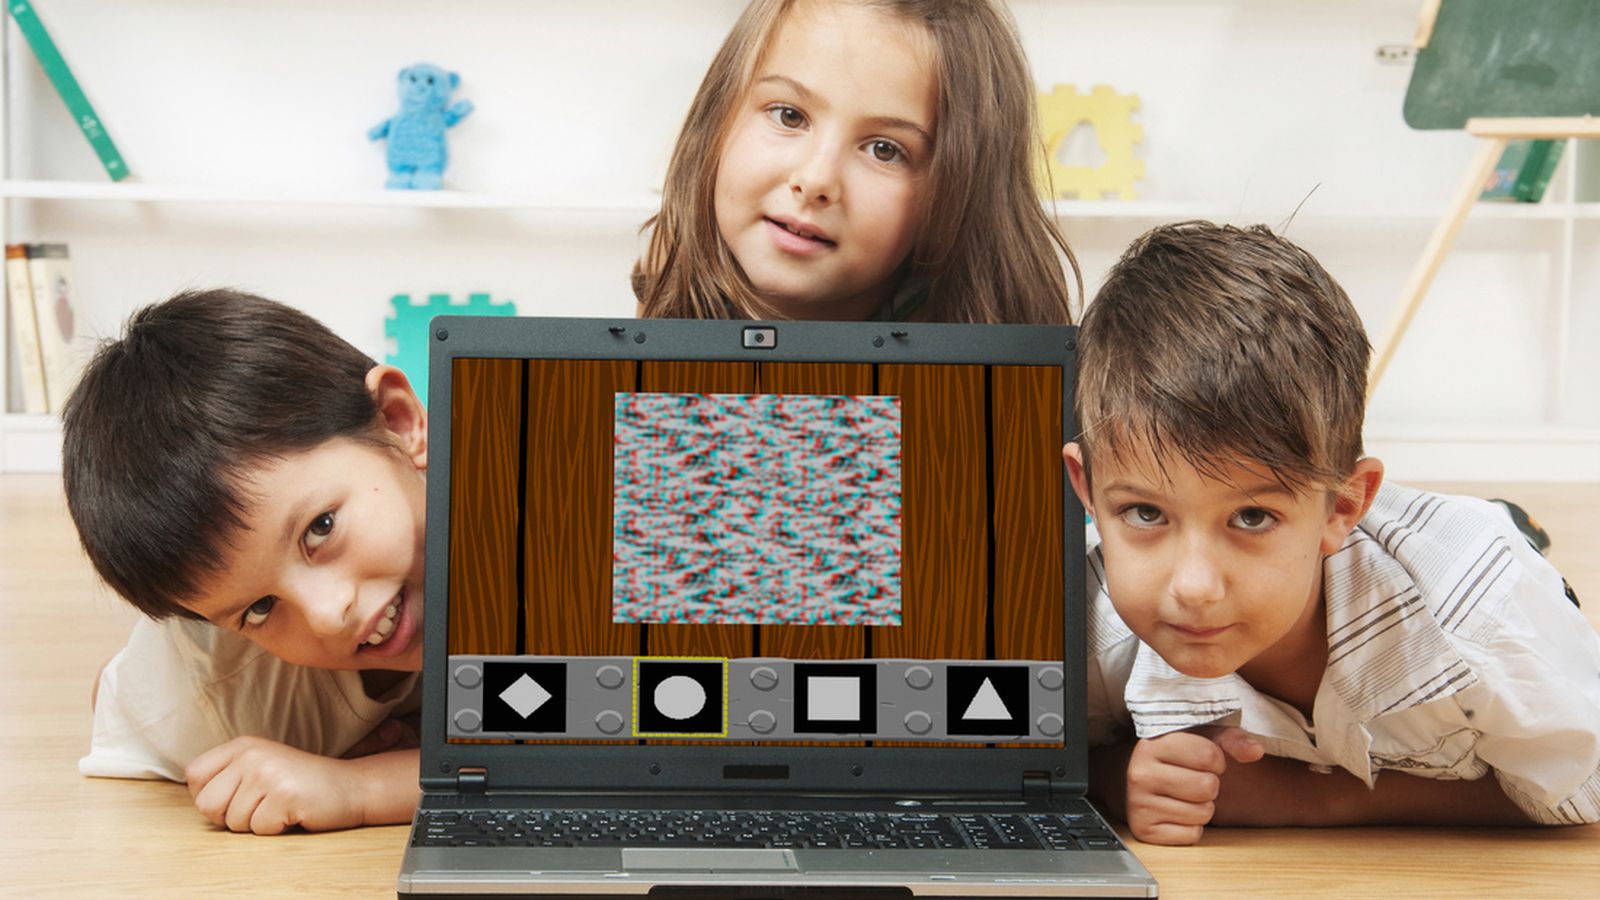 Are electronic games for kids truly effective for correcting lazy eye conditions?